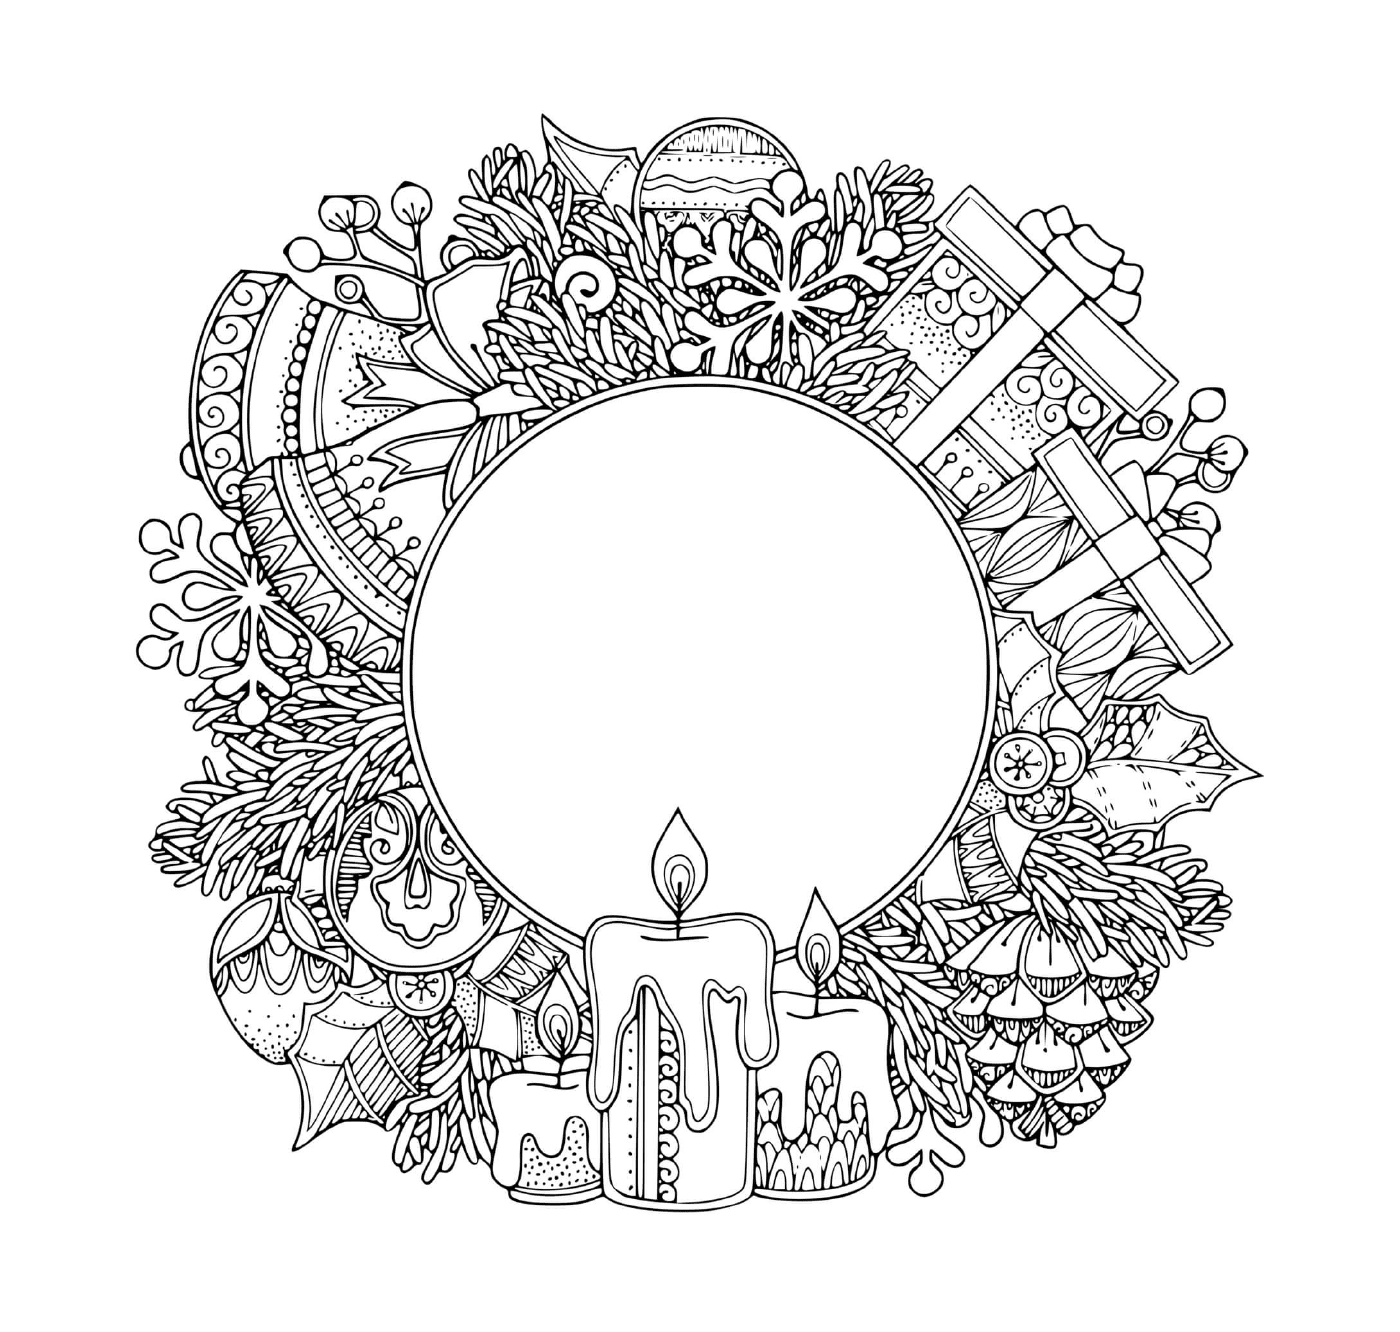  A complex and difficult Christmas crown mandala 